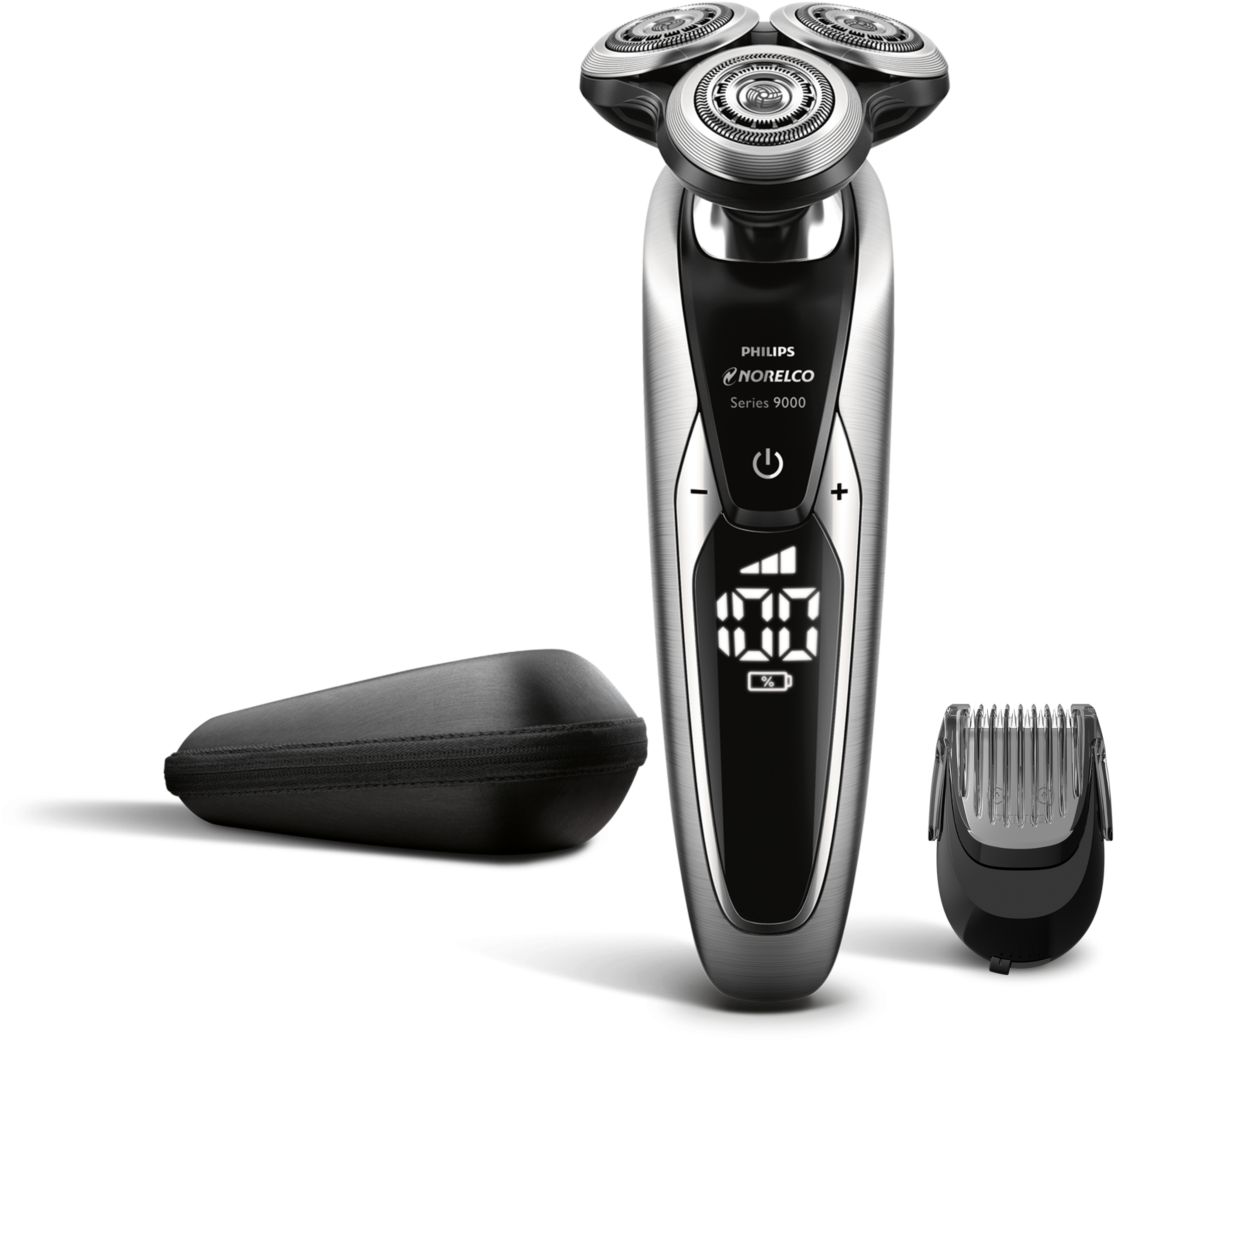 Wet & dry electric shaver, Series 9000